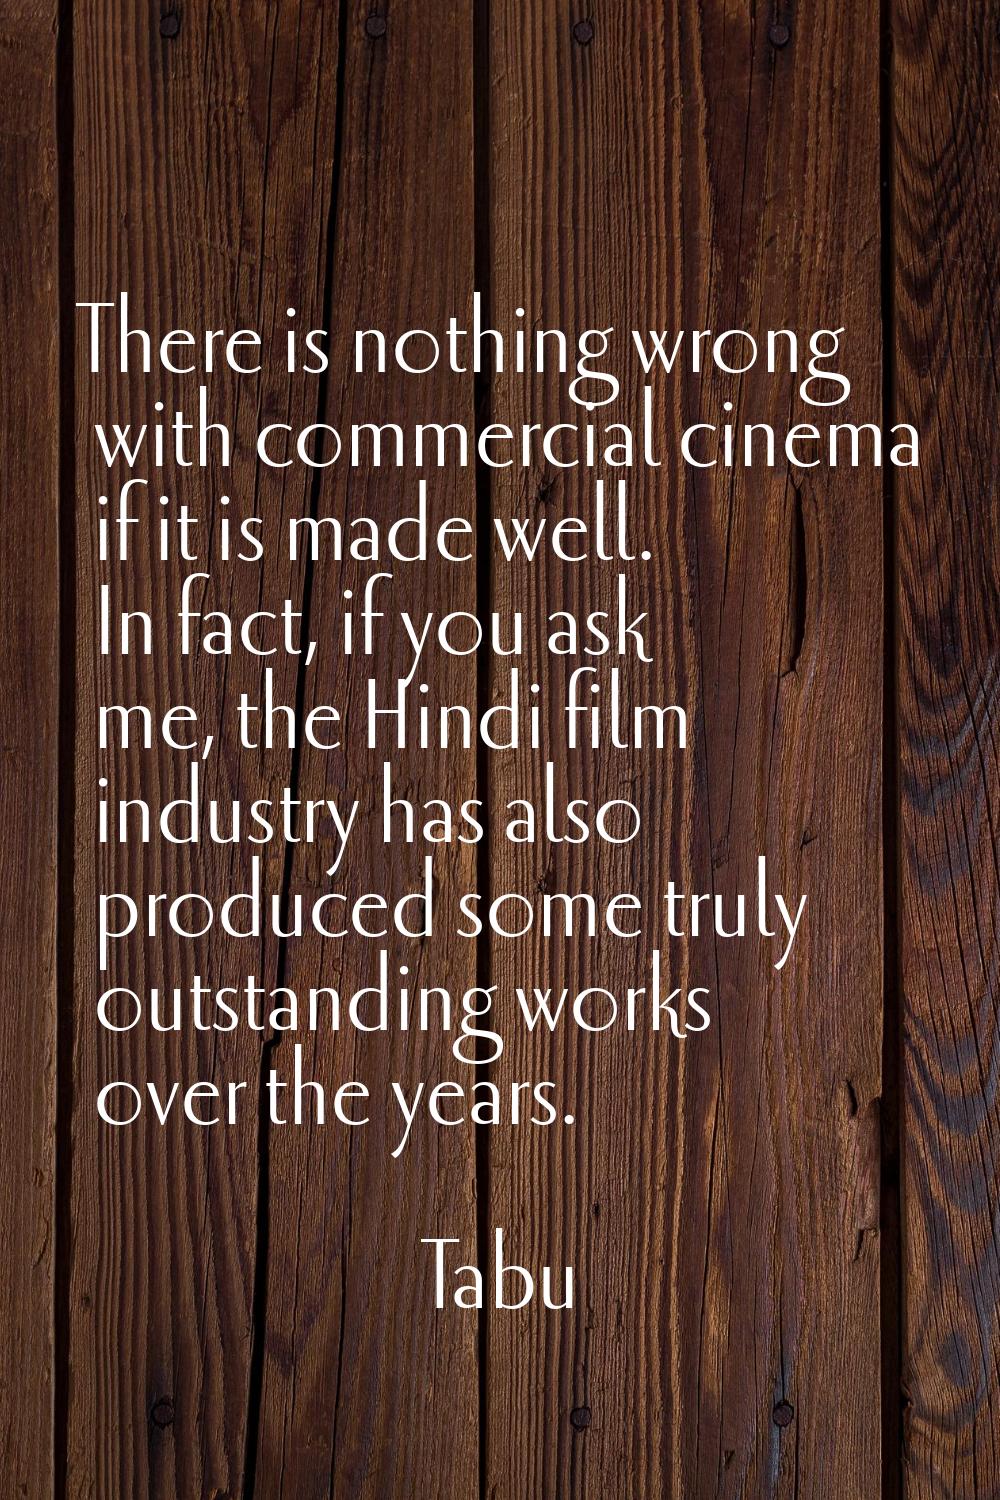 There is nothing wrong with commercial cinema if it is made well. In fact, if you ask me, the Hindi